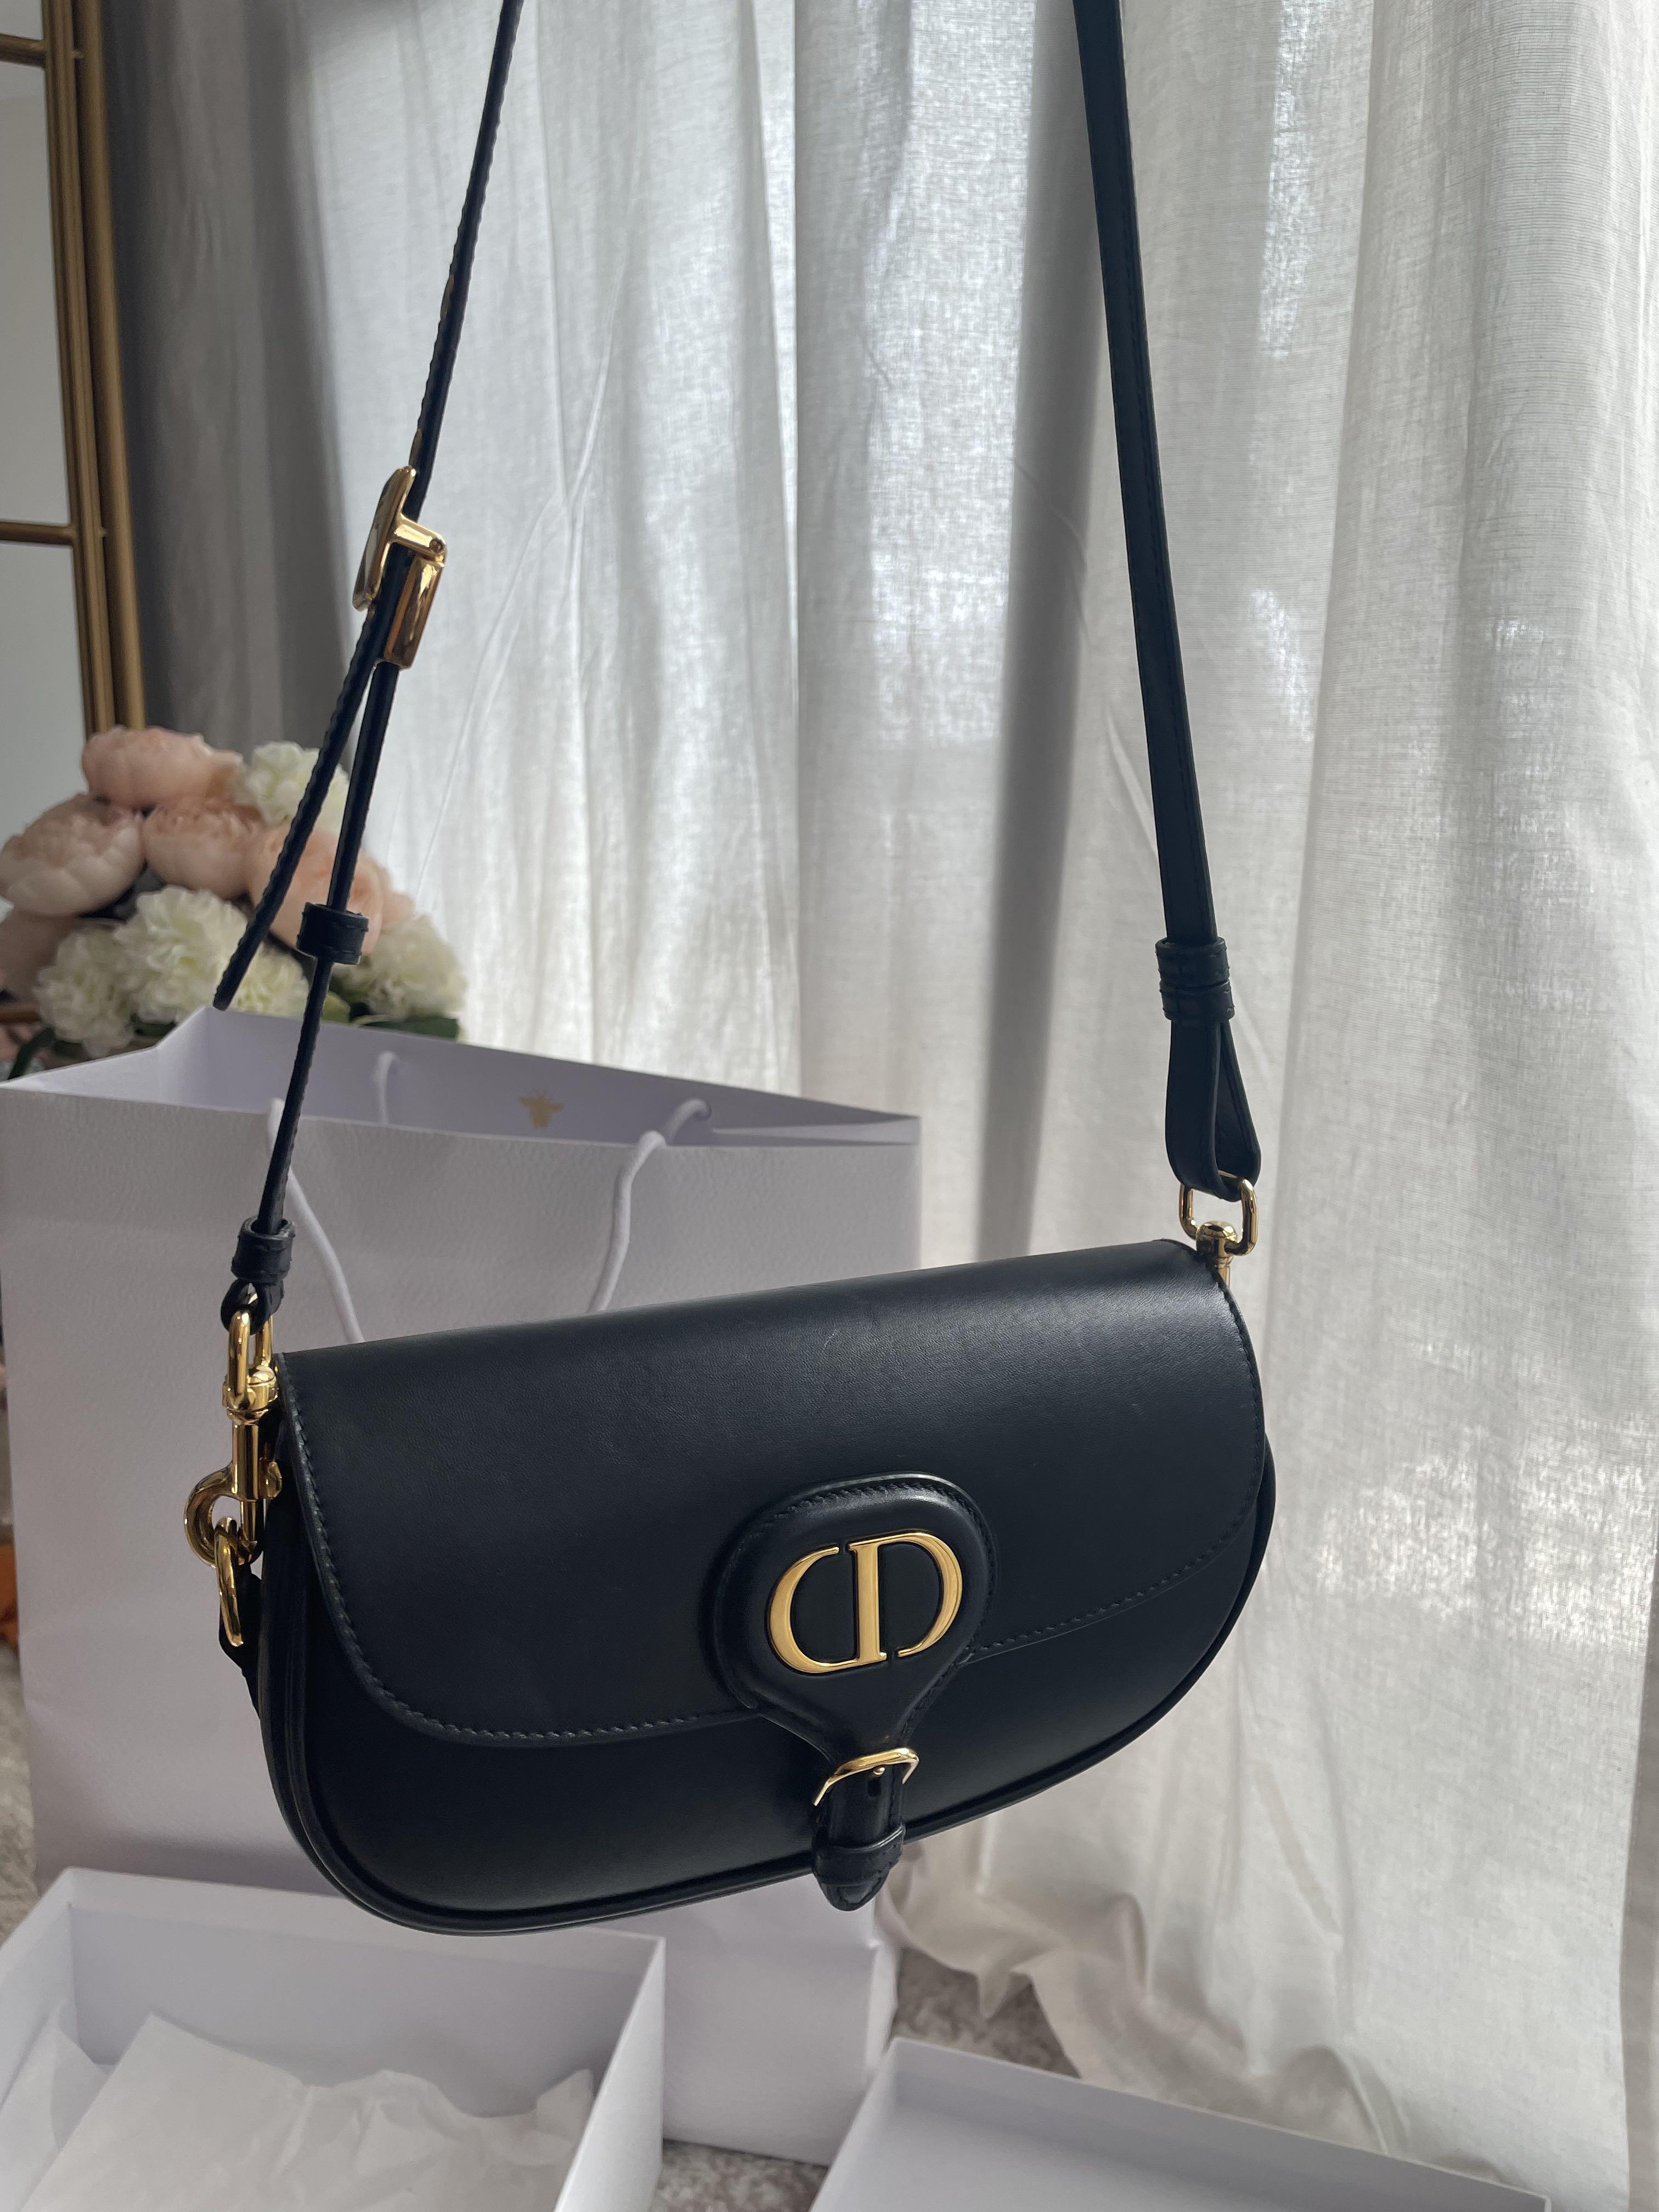 Are You Excited For Dior's Bobby East-West Bag? - BAGAHOLICBOY